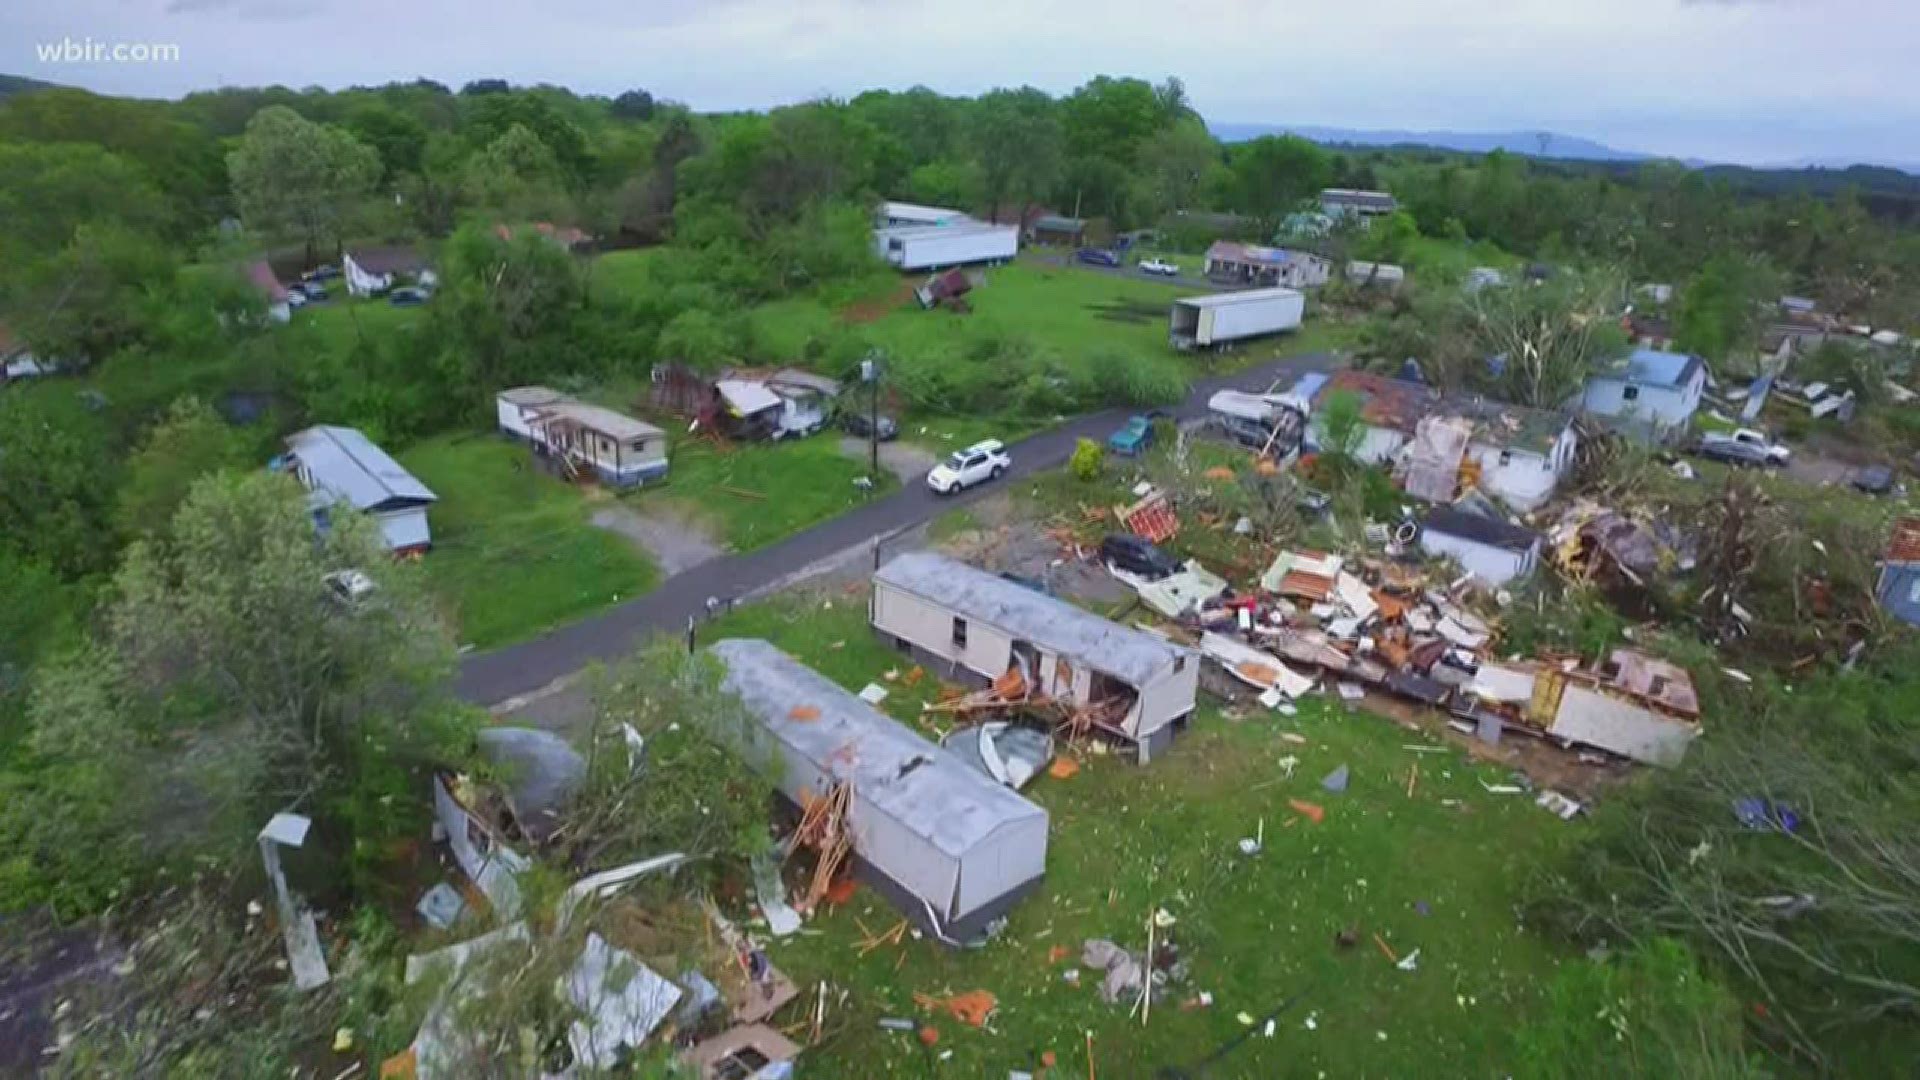 Families are digging through devastation left behind by deadly storms in the Chattanooga area.